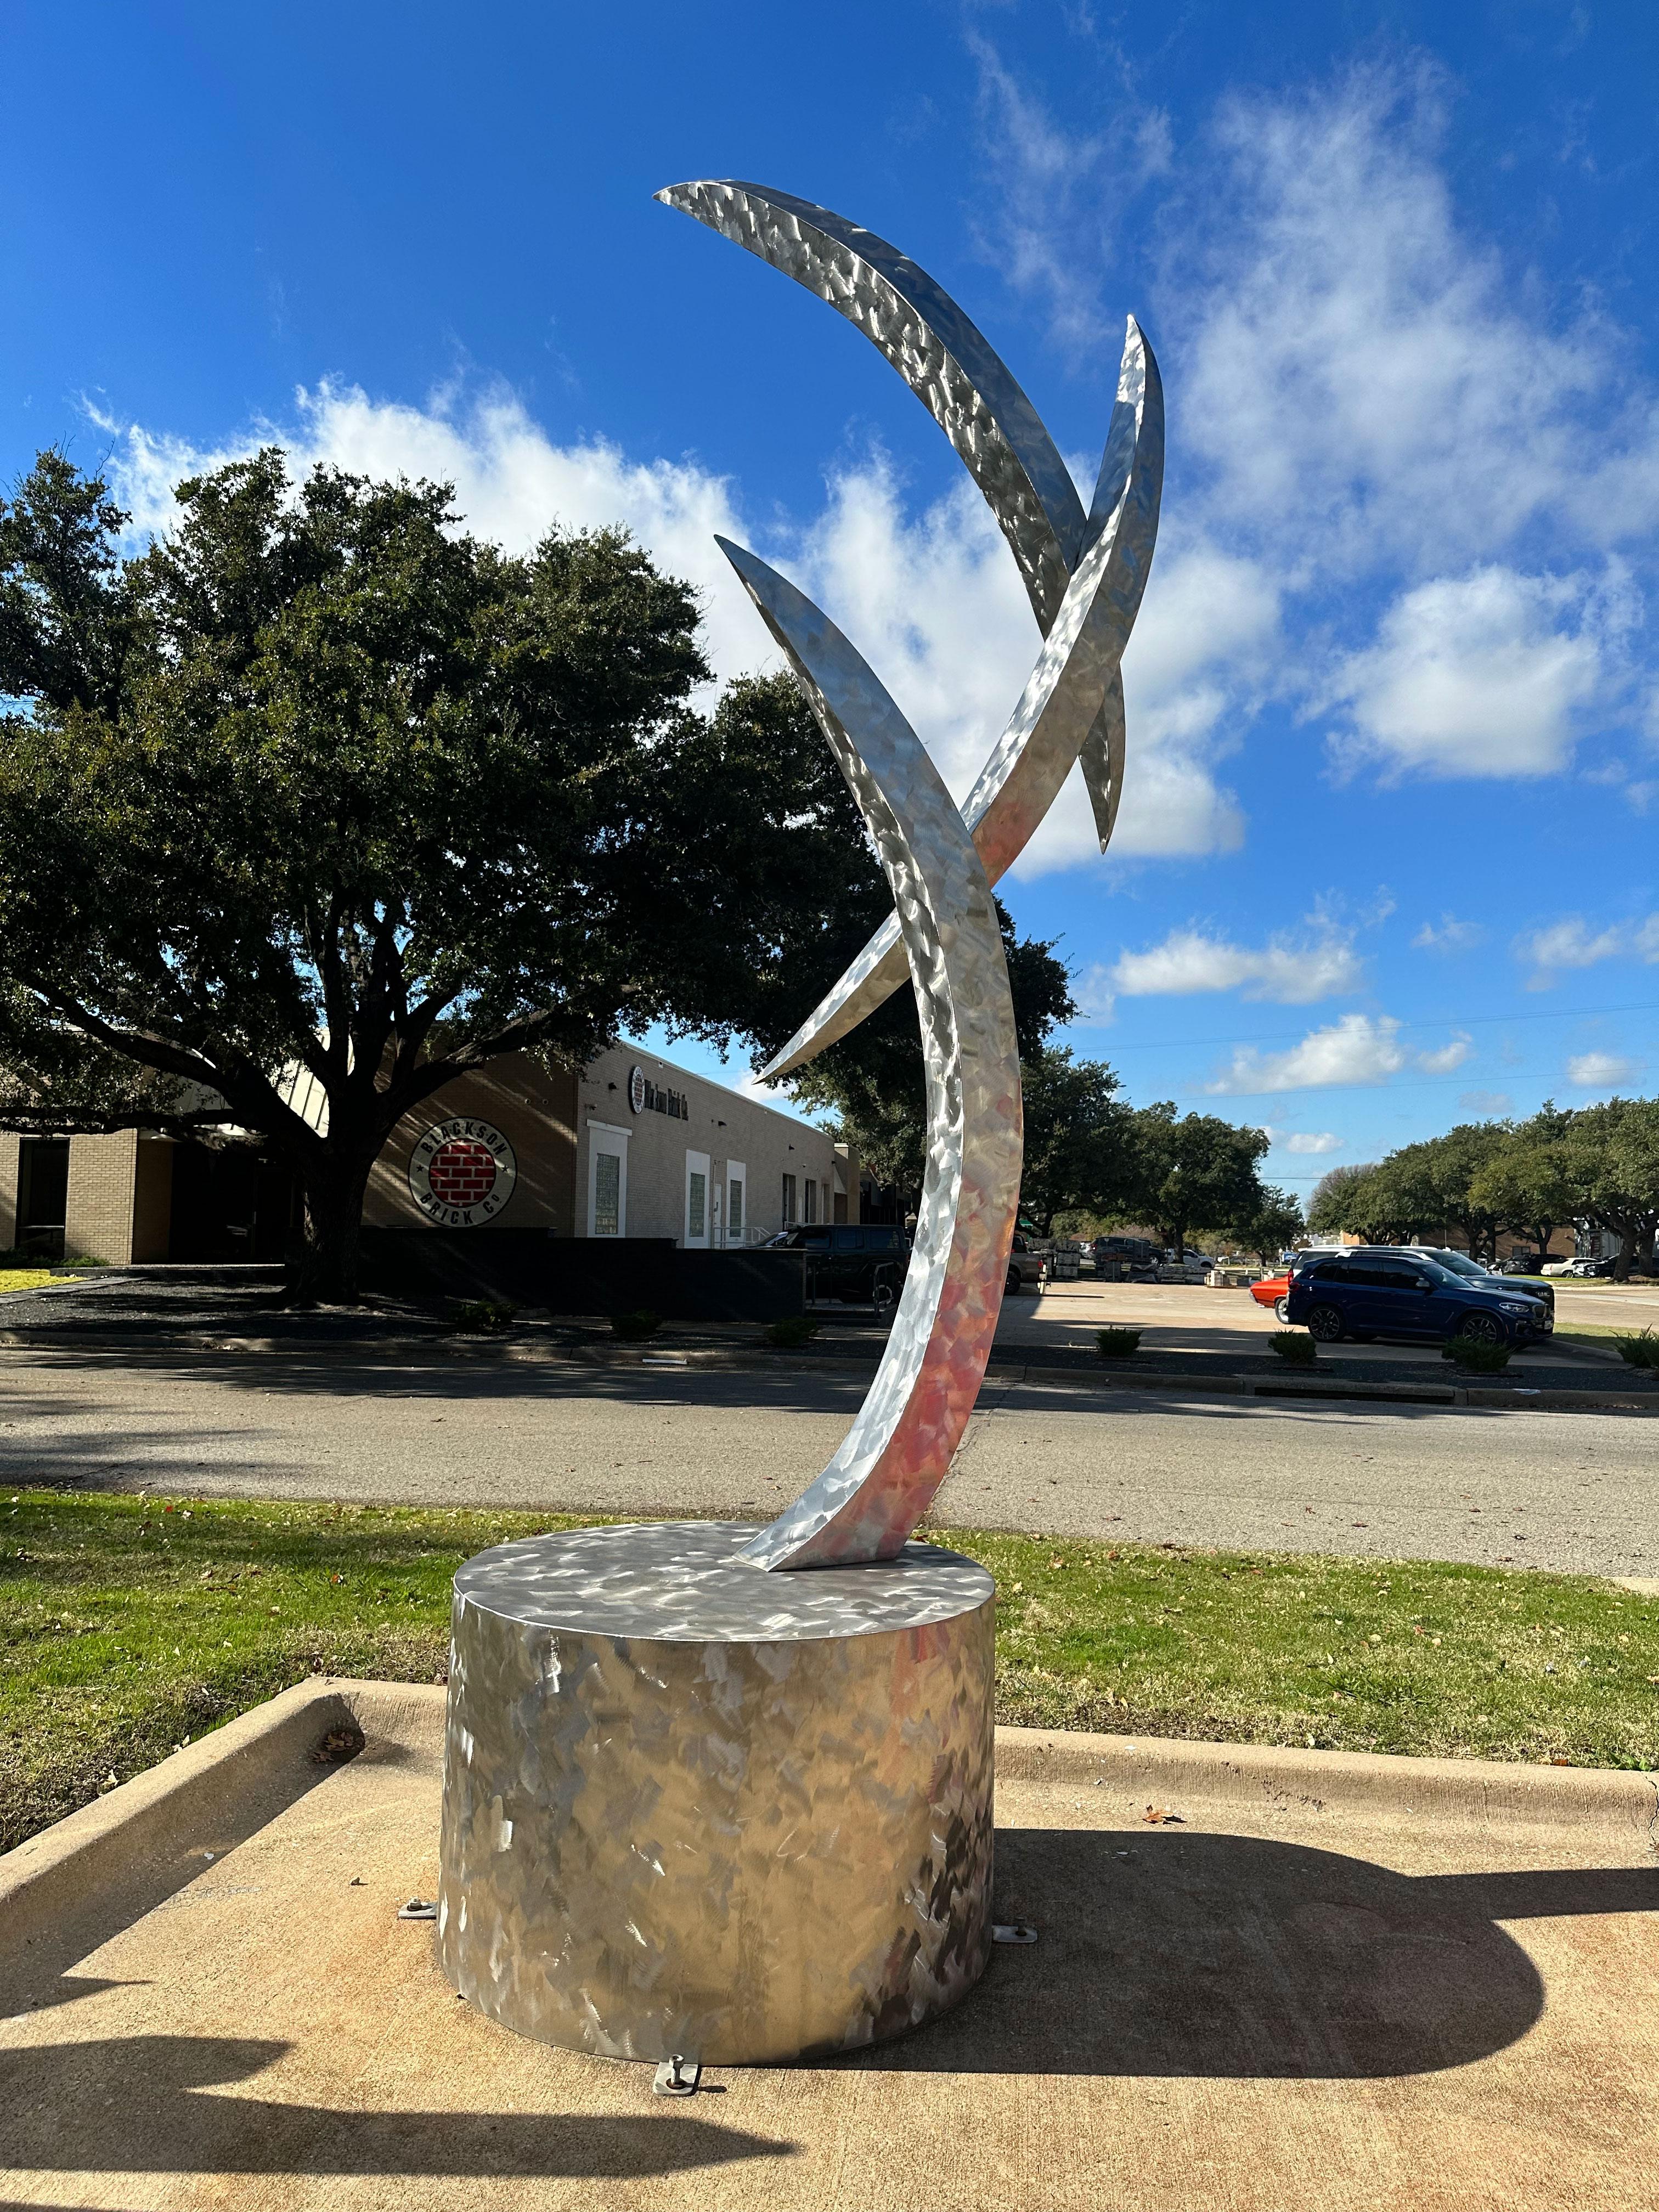 "We Three" by Jerry Dane Sanders is a large brushed finish stainless steel outdoor sculpture measuring 180x72x72. Crafted from high-quality stainless steel, this piece features three pillars that sway gracefully between each other, creating a